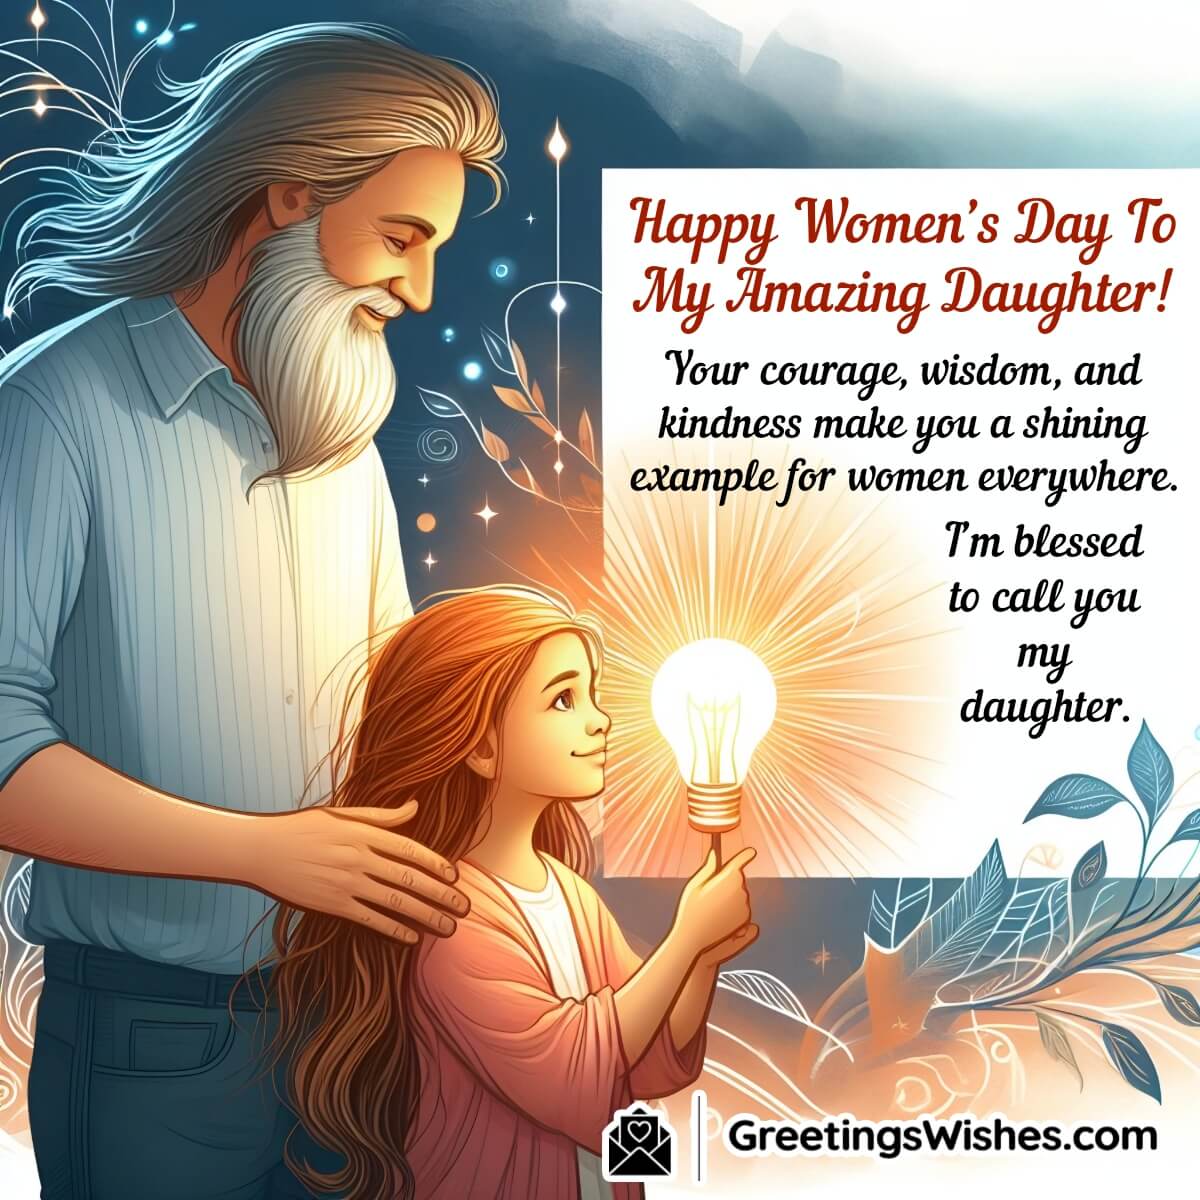 Women’s Day Wishes For Daughter